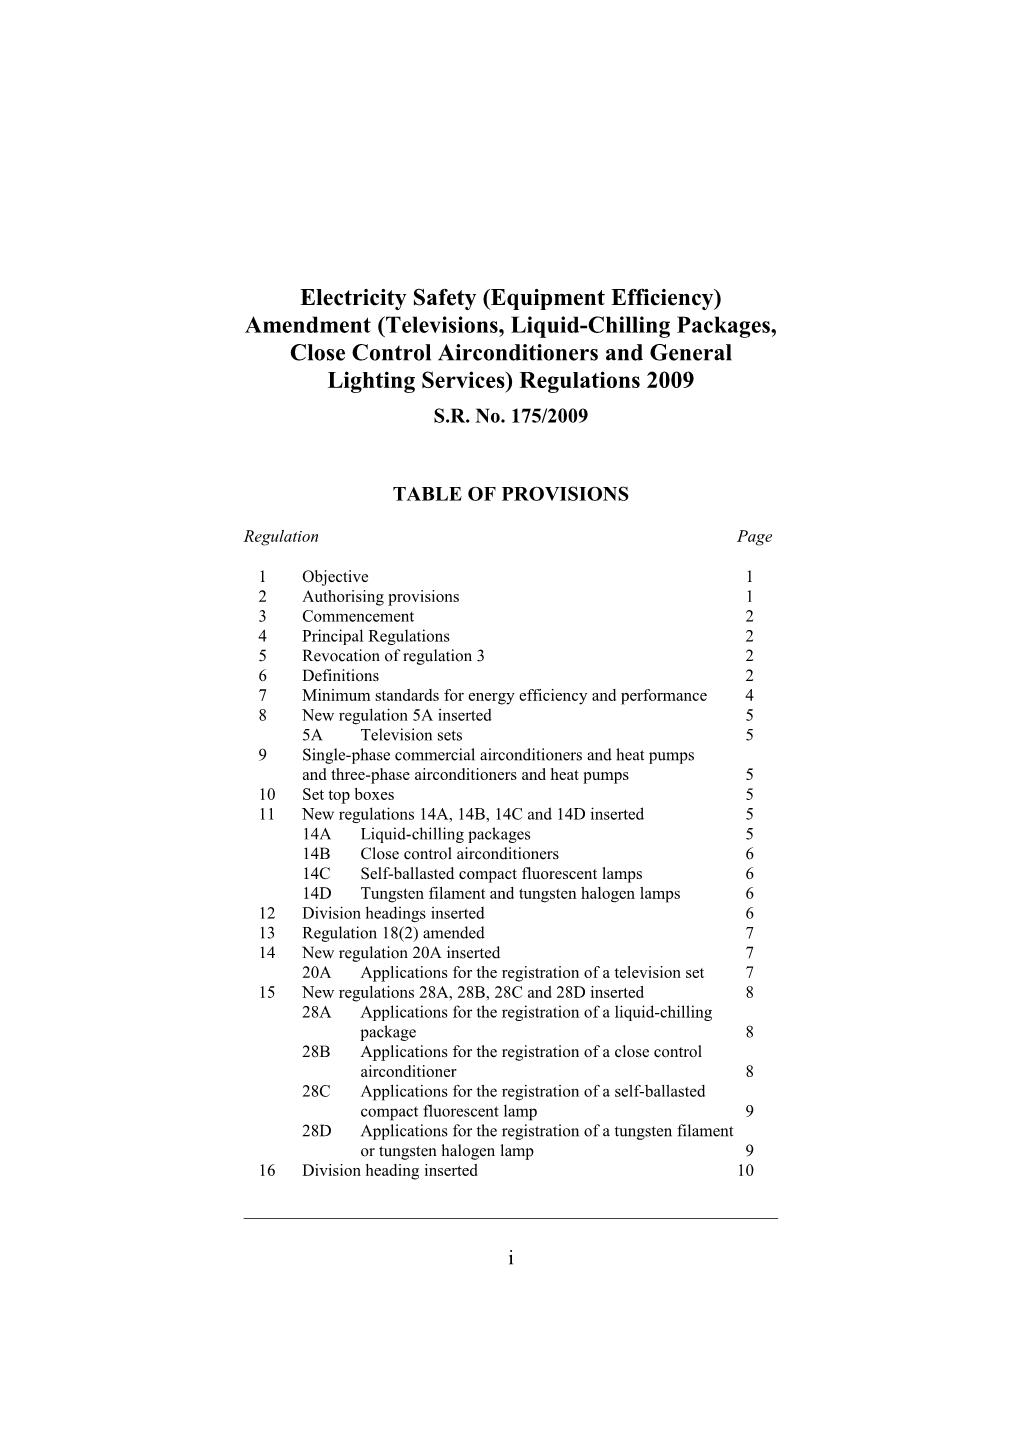 Electricity Safety (Equipment Efficiency) Amendment (Televisions, Liquid-Chilling Packages